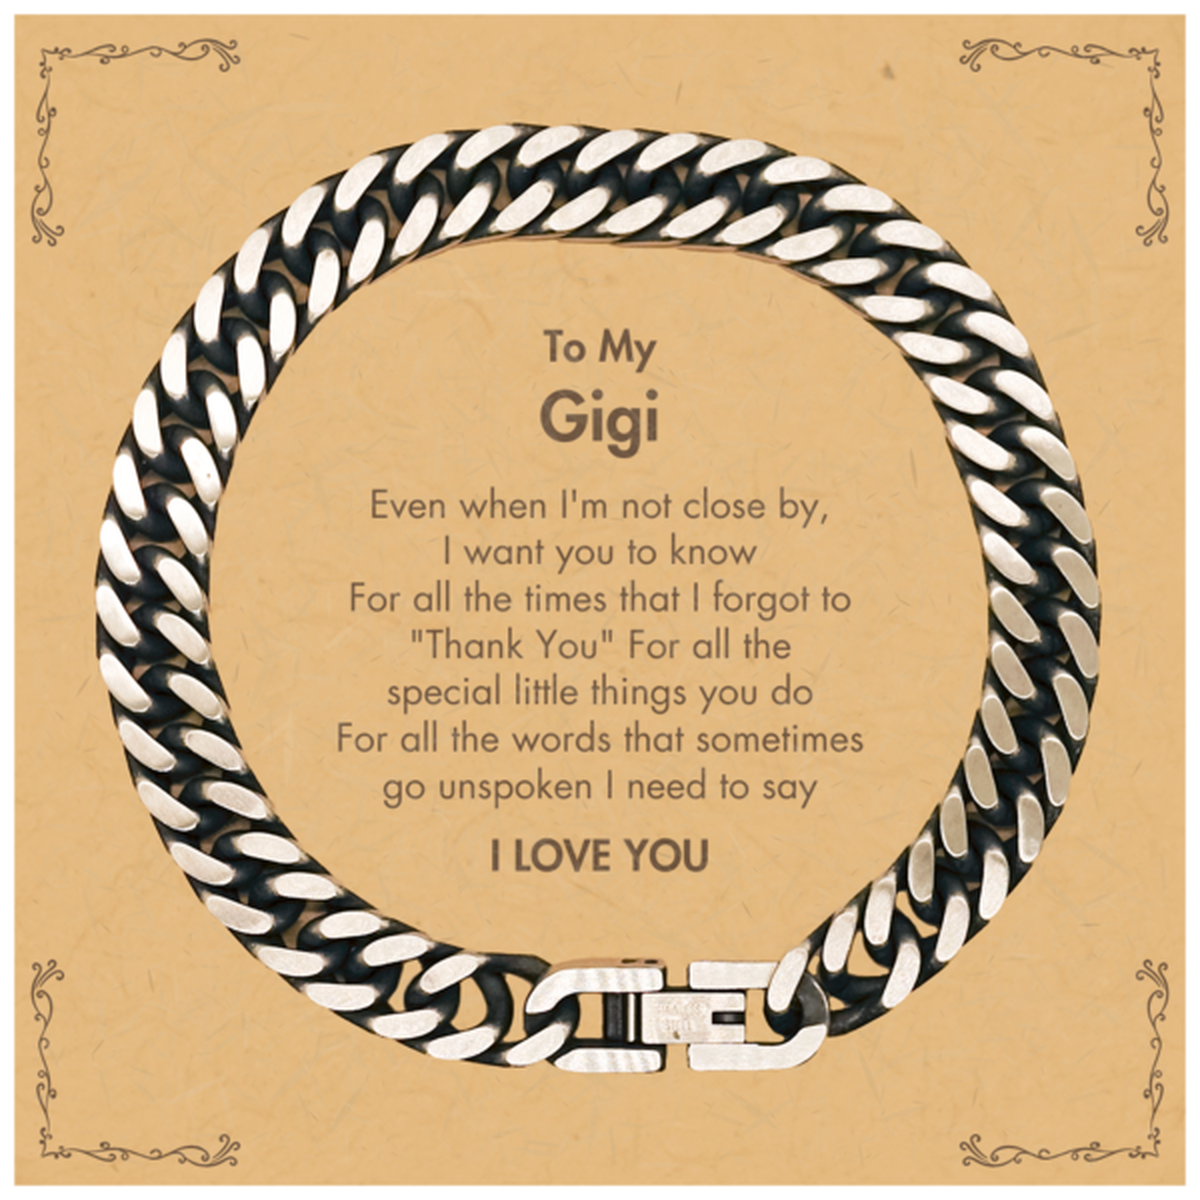 Thank You Gifts for Gigi, Keepsake Cuban Link Chain Bracelet Gifts for Gigi Birthday Mother's day Father's Day Gigi For all the words That sometimes go unspoken I need to say I LOVE YOU